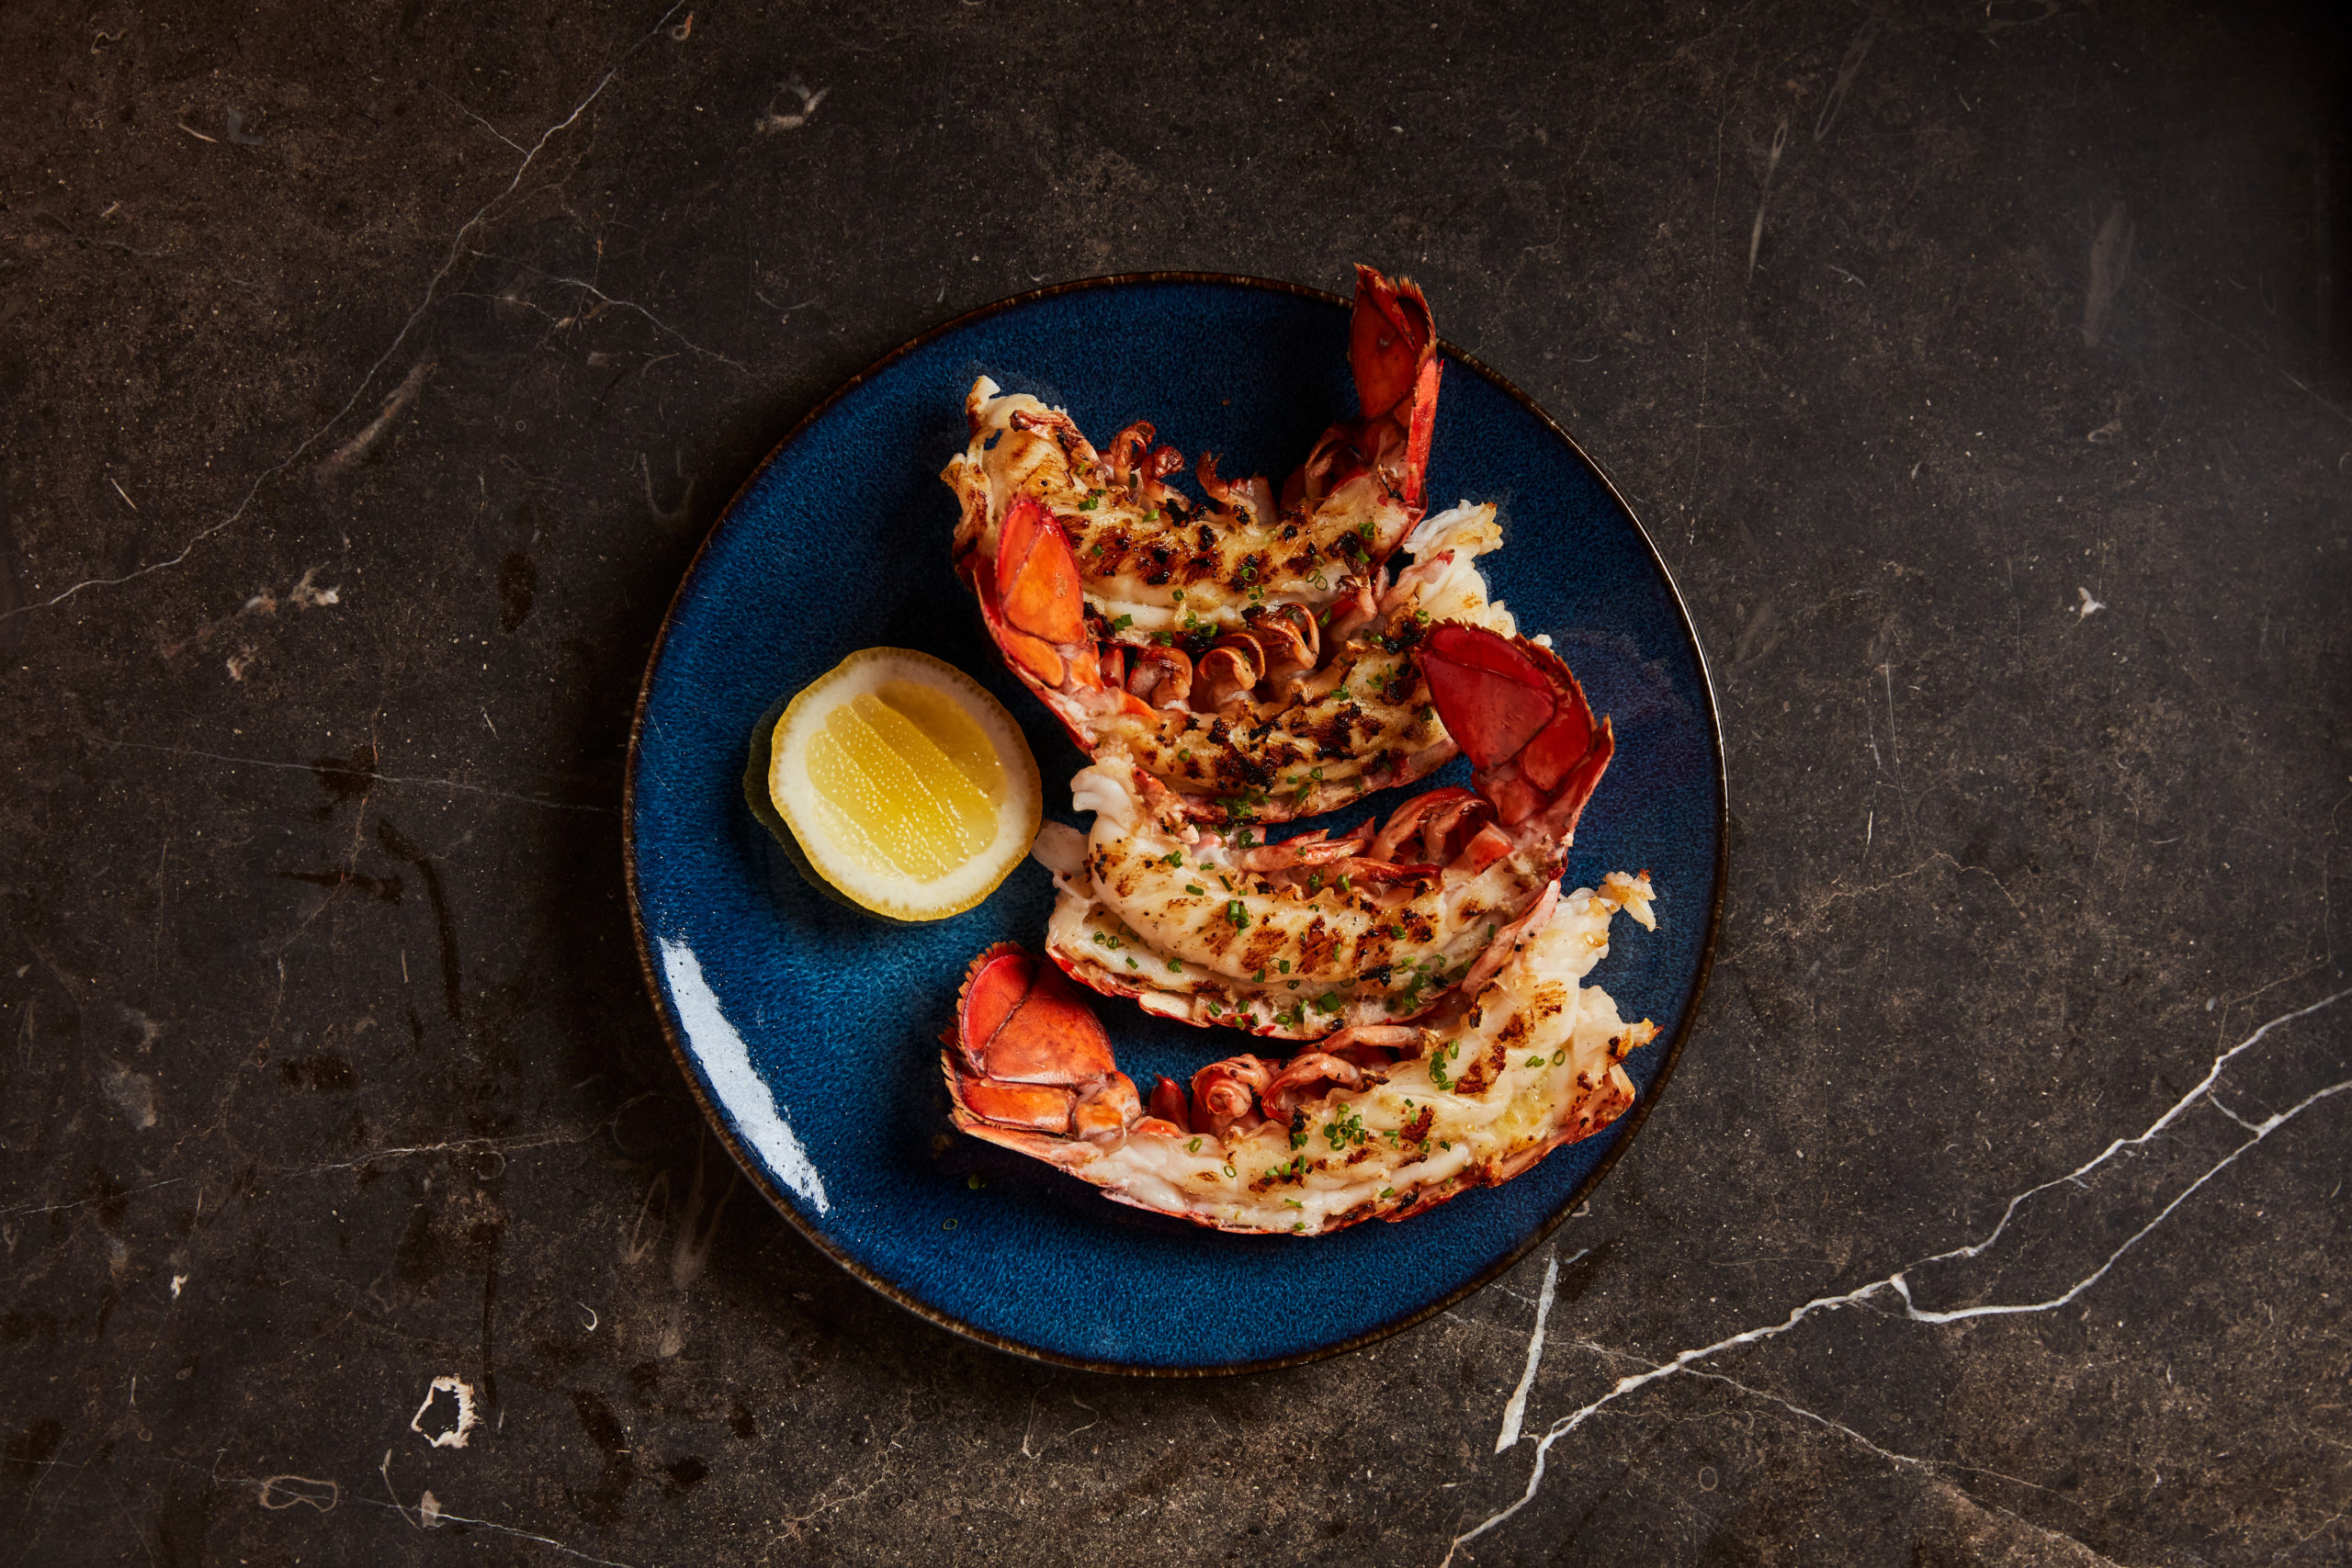 Lobster Tails cooked over the wood fire with yuzu-kosho garlic butter